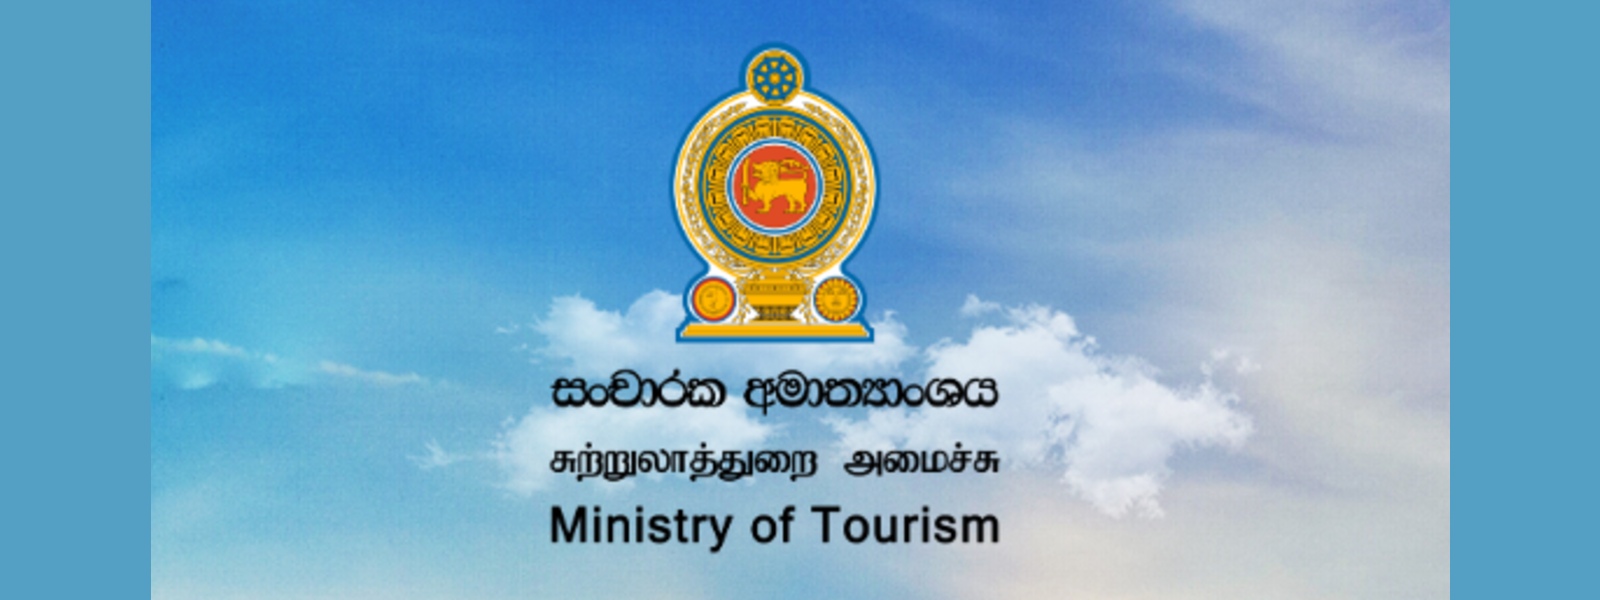 Over $580mn income from tourism industry so far in 2022